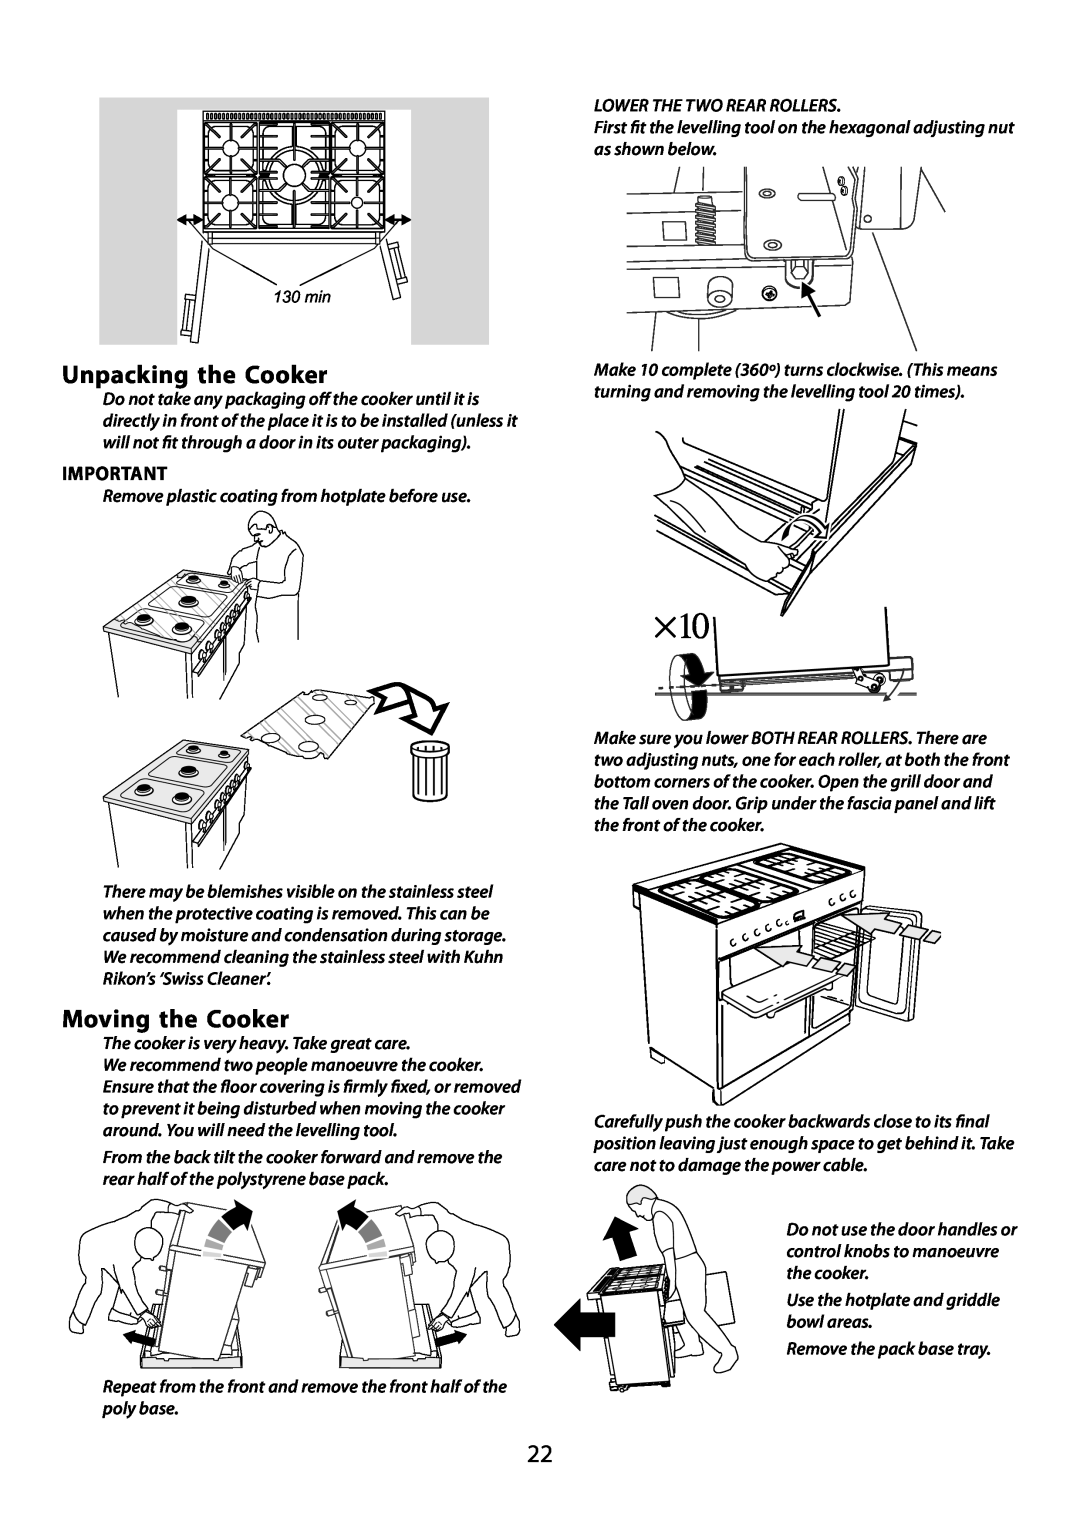 Garmin 210 GEO T DL user manual Unpacking the Cooker, Moving the Cooker, Remove plastic coating from hotplate before use 